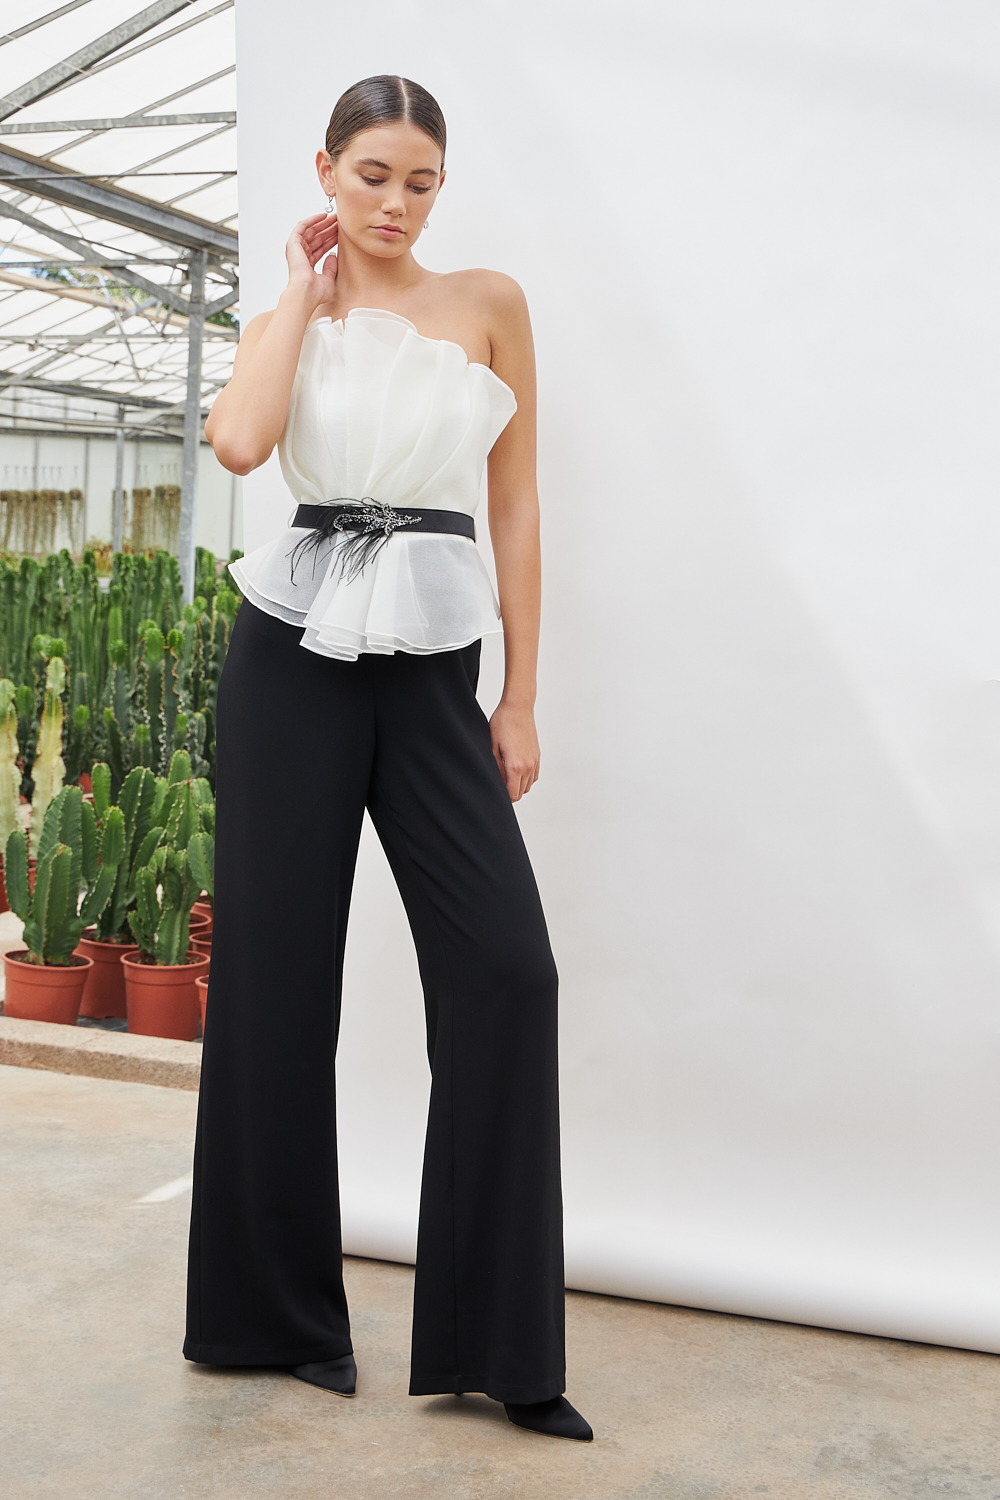 HERMINIA - Cocktail satin strapless jumpsuit with organtza top, straps and belt